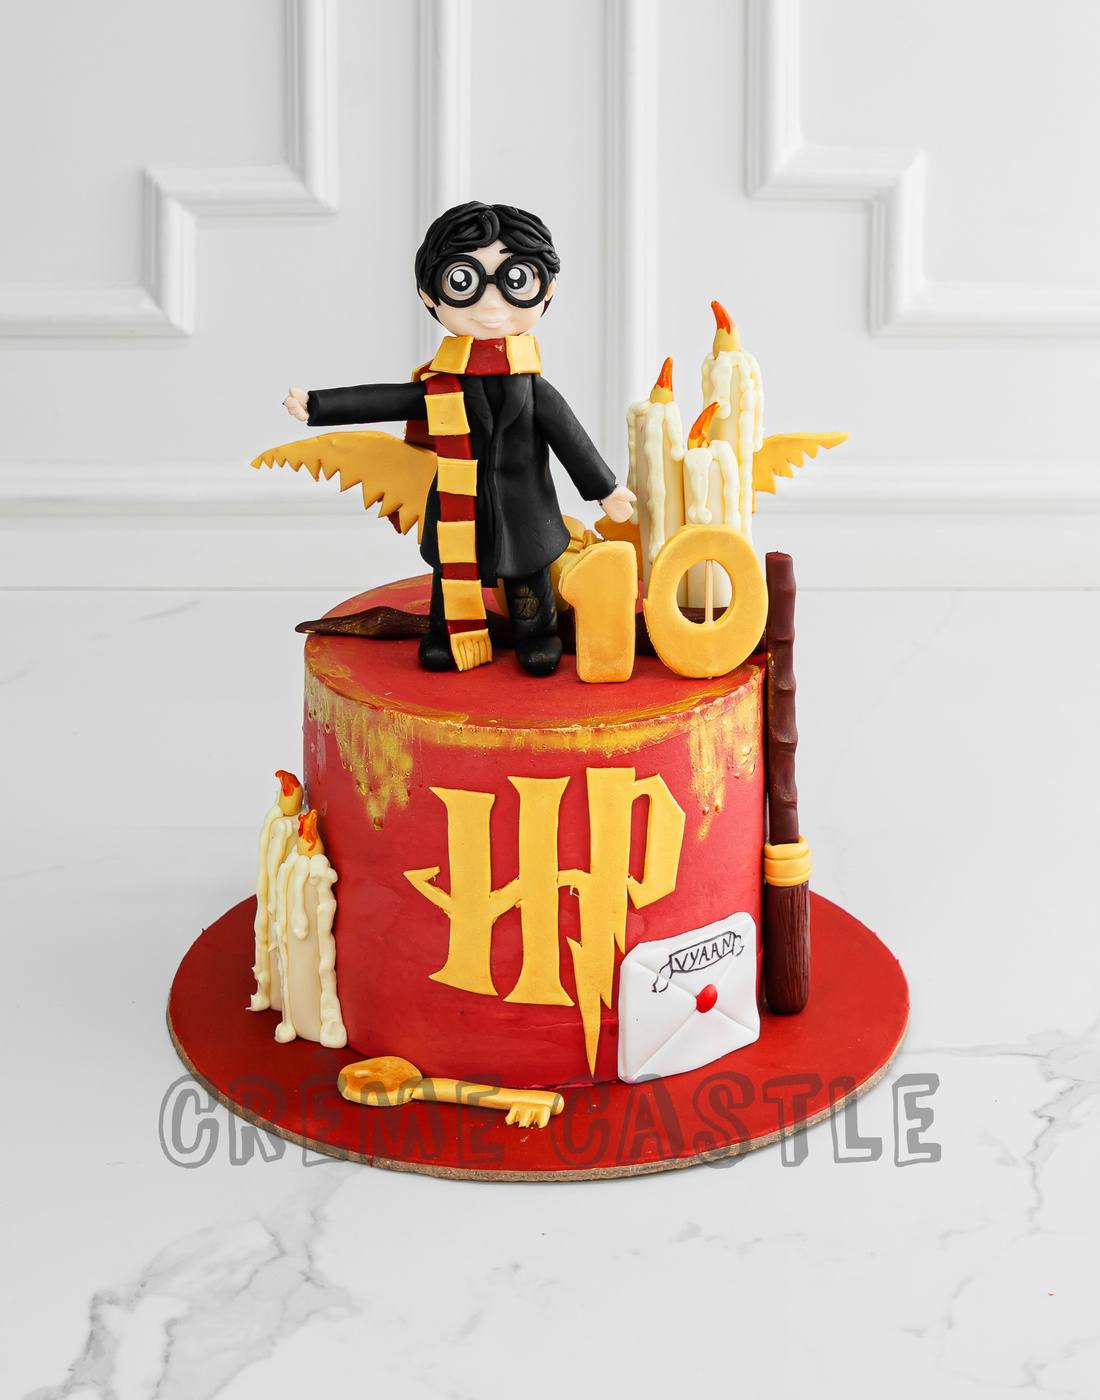 Harry Potter theme Cake in Black by Creme Castle